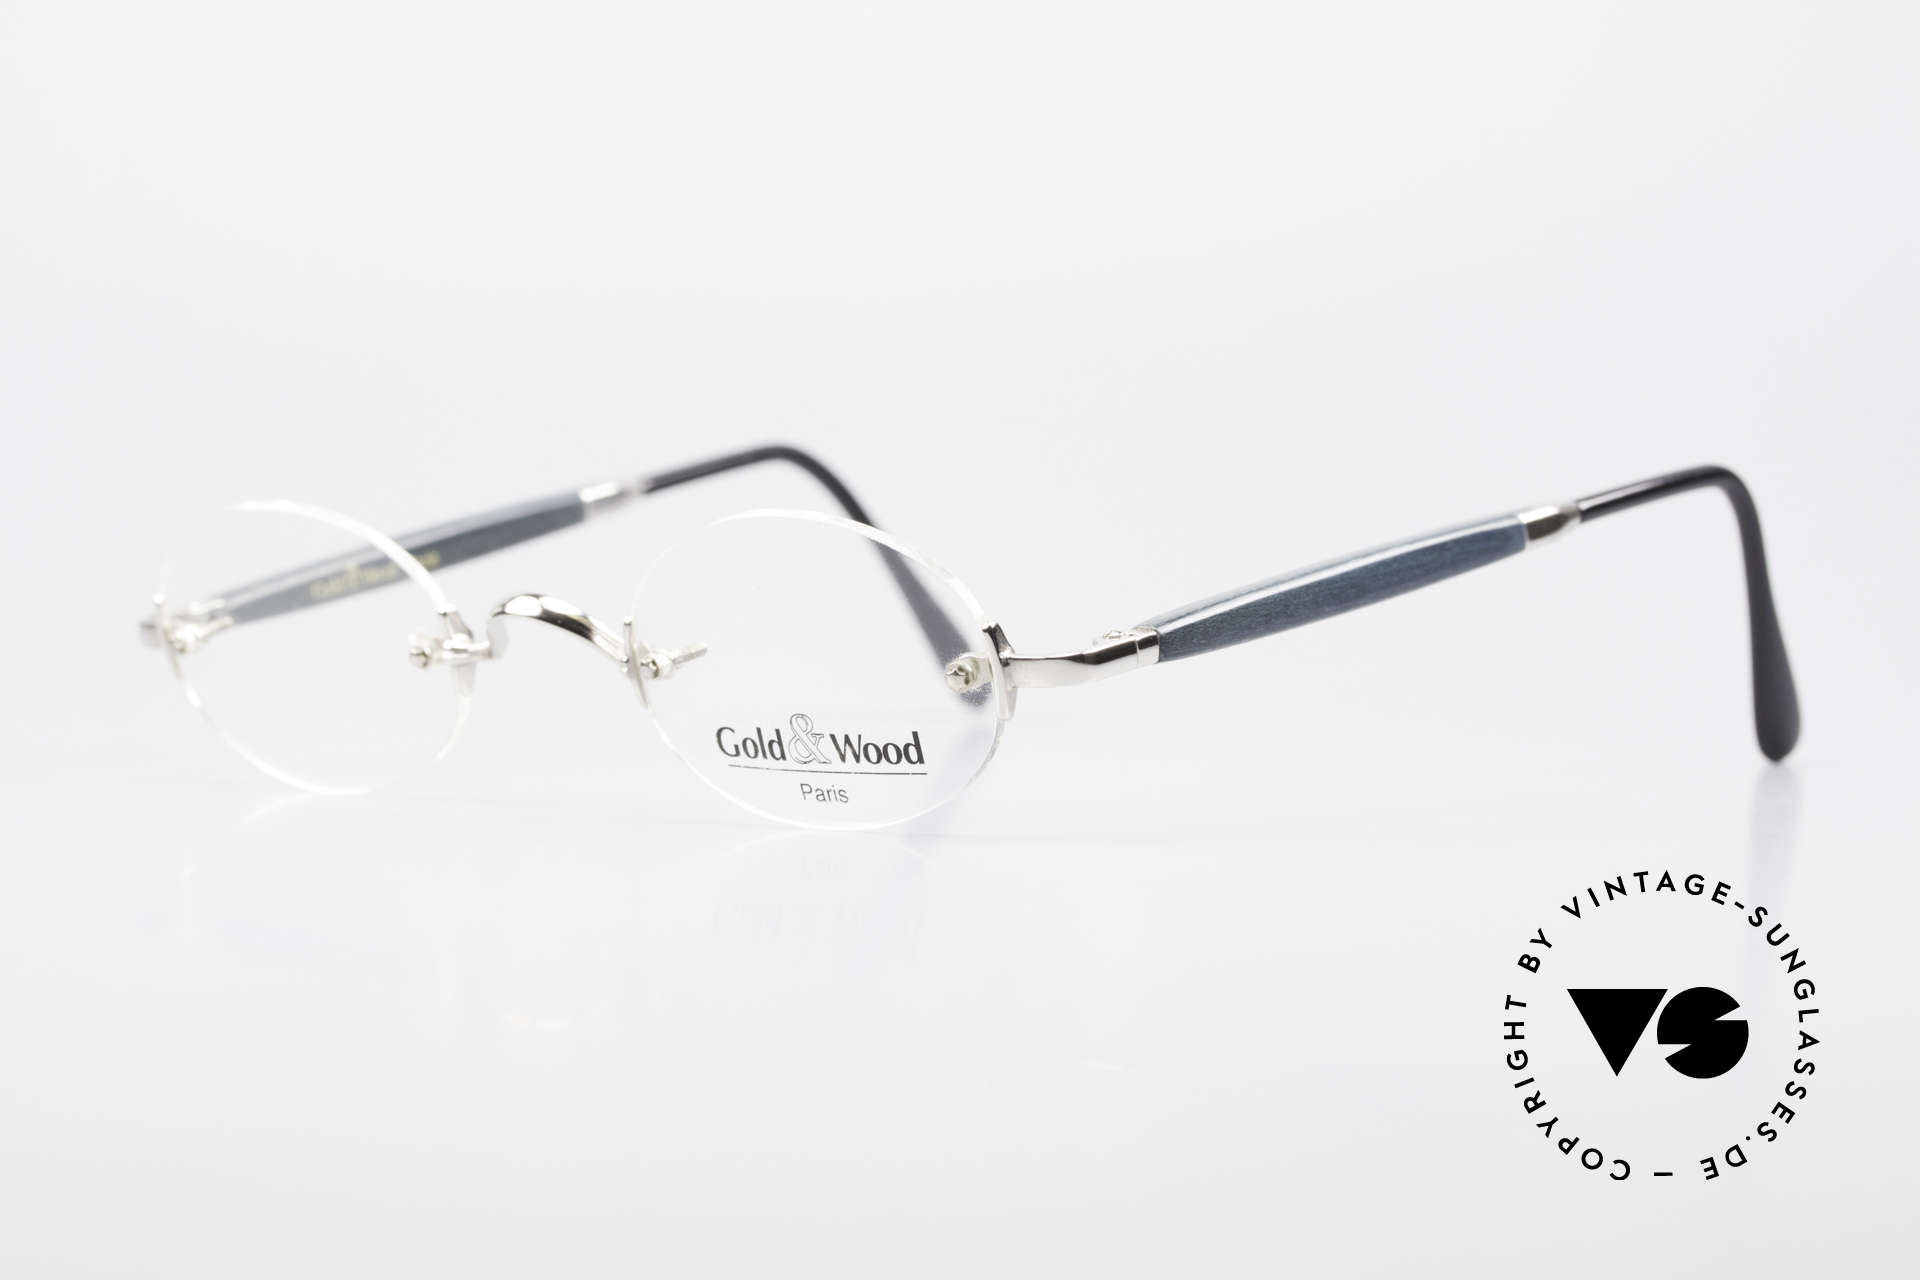 Gold & Wood 338 Luxury Rimless Specs Oval 90's, classic unisex model with flexible spring hinges, Made for Men and Women